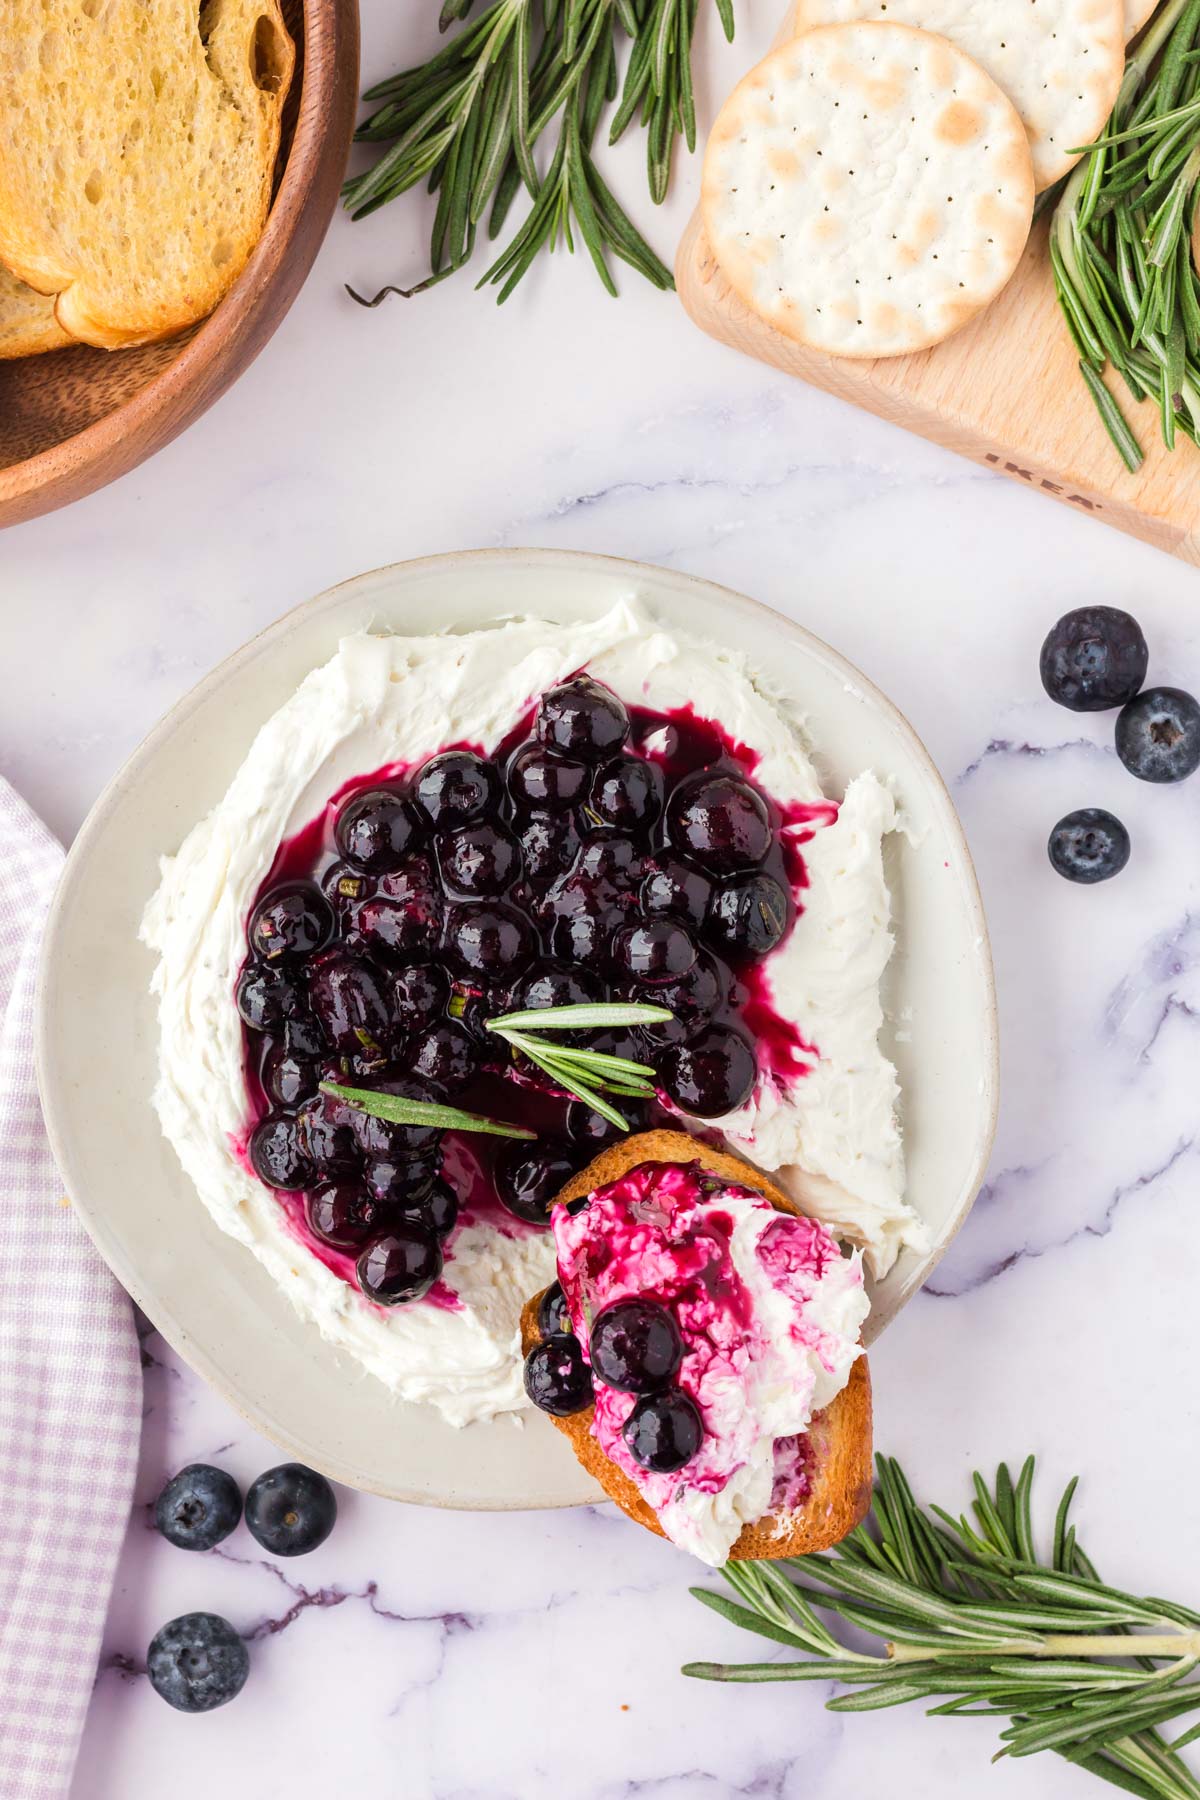 Goat cheese with blueberry topping, rosemary, crackers on white platters.